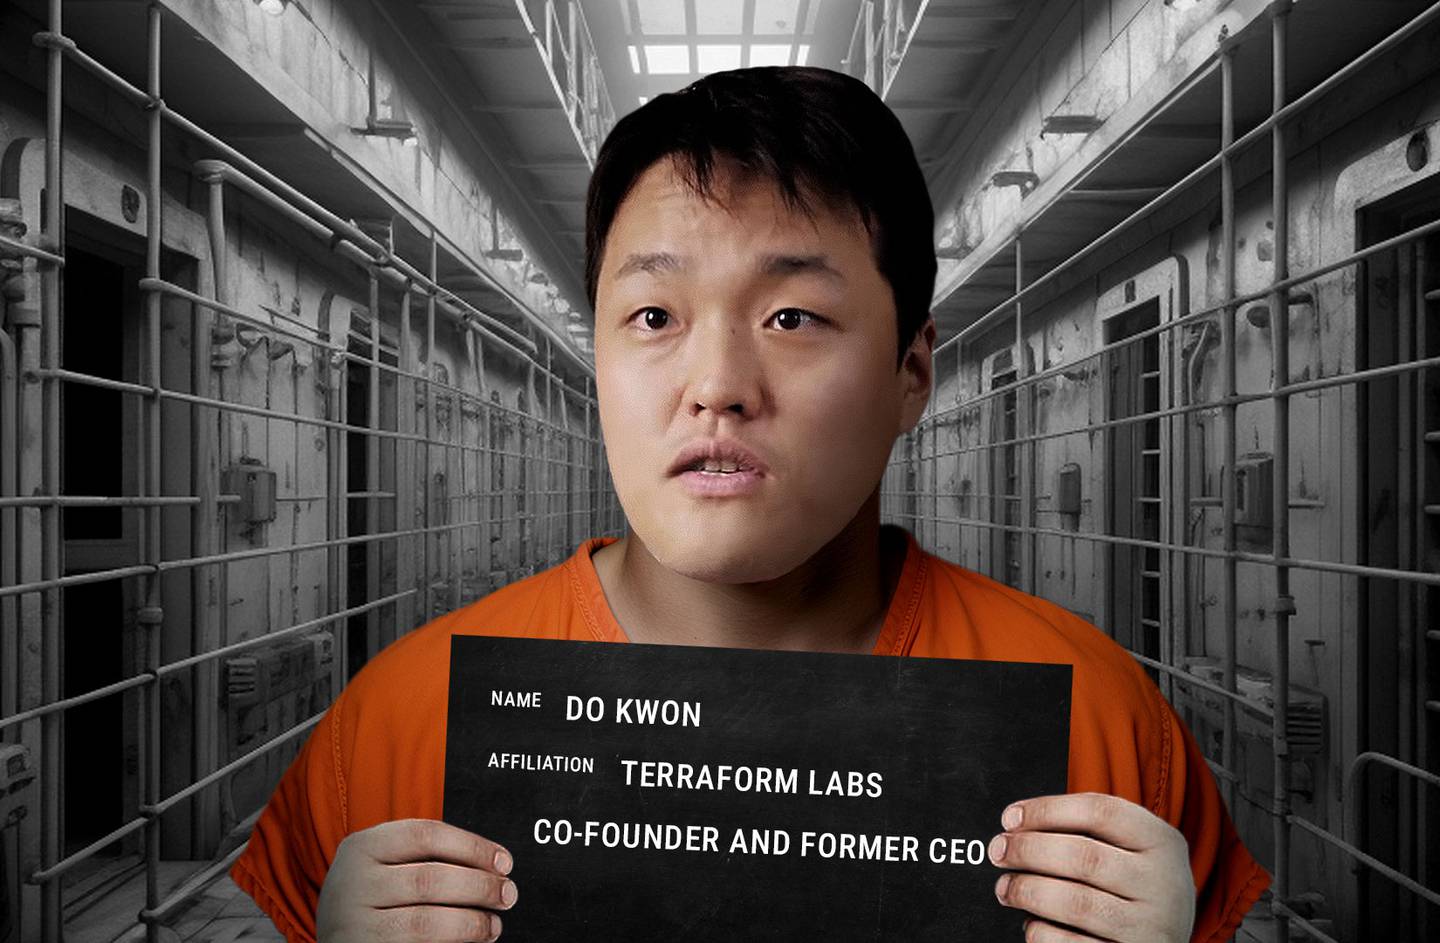 An illustration of Do Kwon dressed as a prisoner with a jail background.